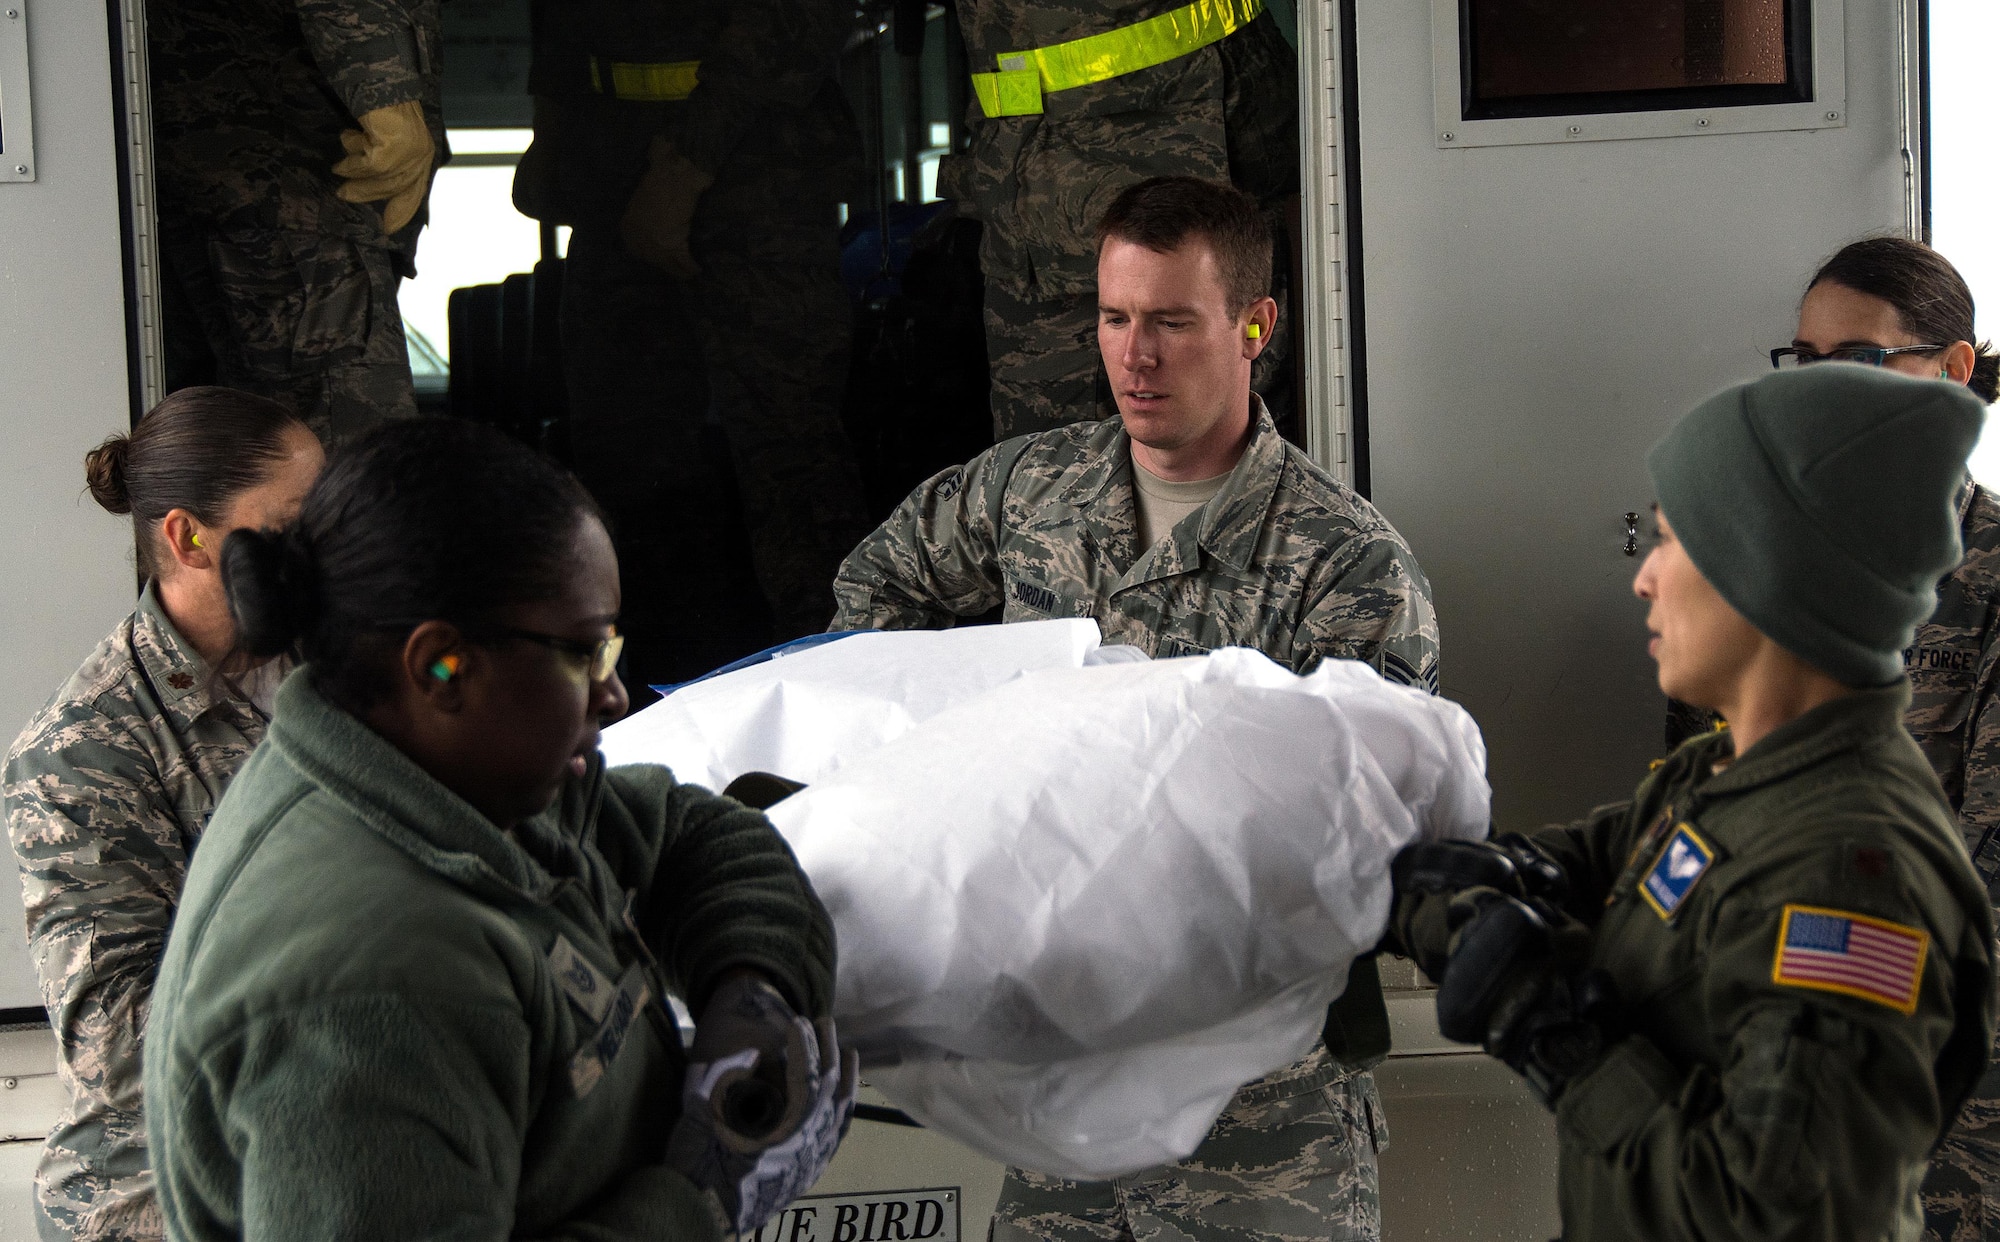 Patriot Delta participants carry a litter with a medical manikin patient onto a C-17 Globemaster III during Patriot Delta at Travis Air Force Base, Calif. on March 24, 2017. Patriot Delta brought in aeromedical evacuations squadrons from the from the 911th Airlift Wing at Pittsburgh Air Reserve Station, Penn., the 908th AW at Maxwell Air Force Base, Miss.; the 932d Airlift Wing at Scott AFB, Ill.; and the 349th Air Mobility Wing at Travis AFB. (U.S. Air Force photo by Staff Sgt. Daniel Phelps)